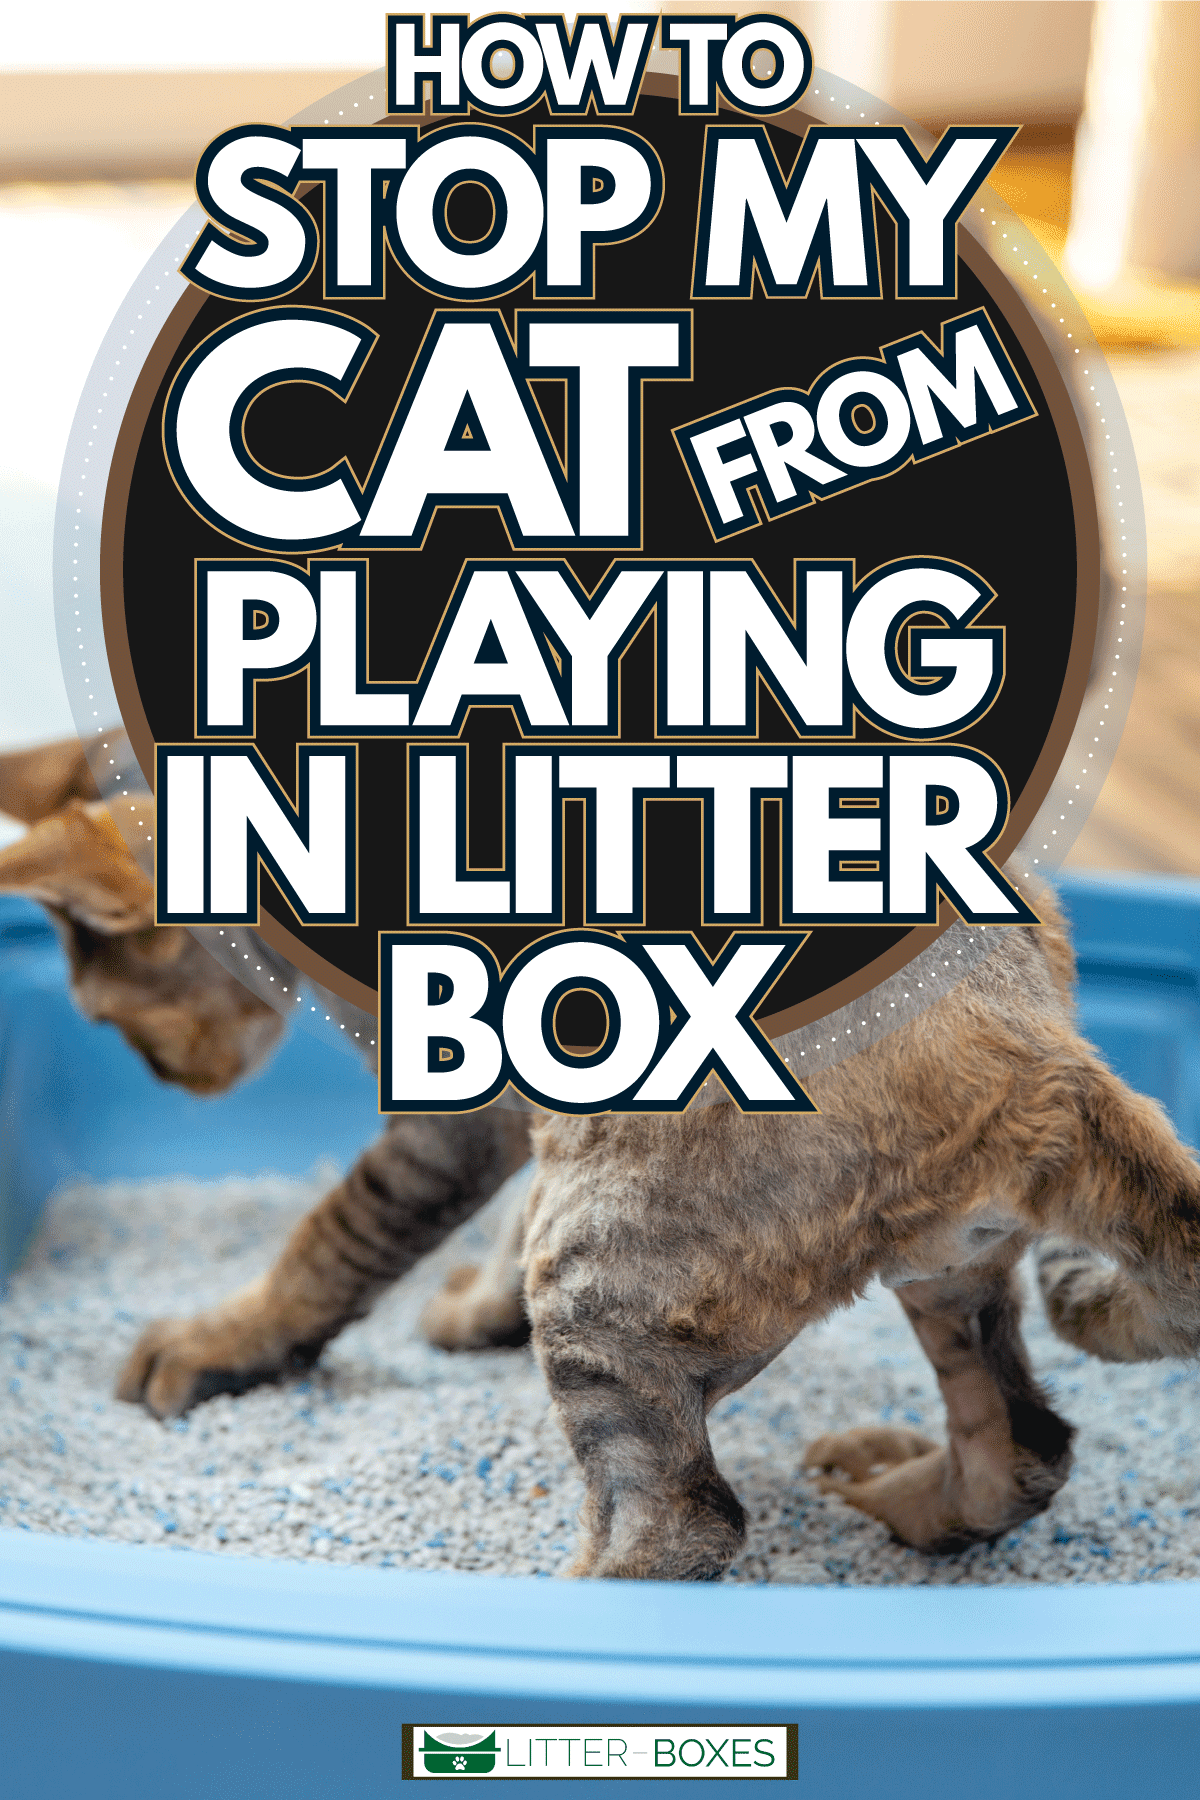 Cute little kittens playing on their cat litter, How To Stop My Cat From Playing In Litter Box